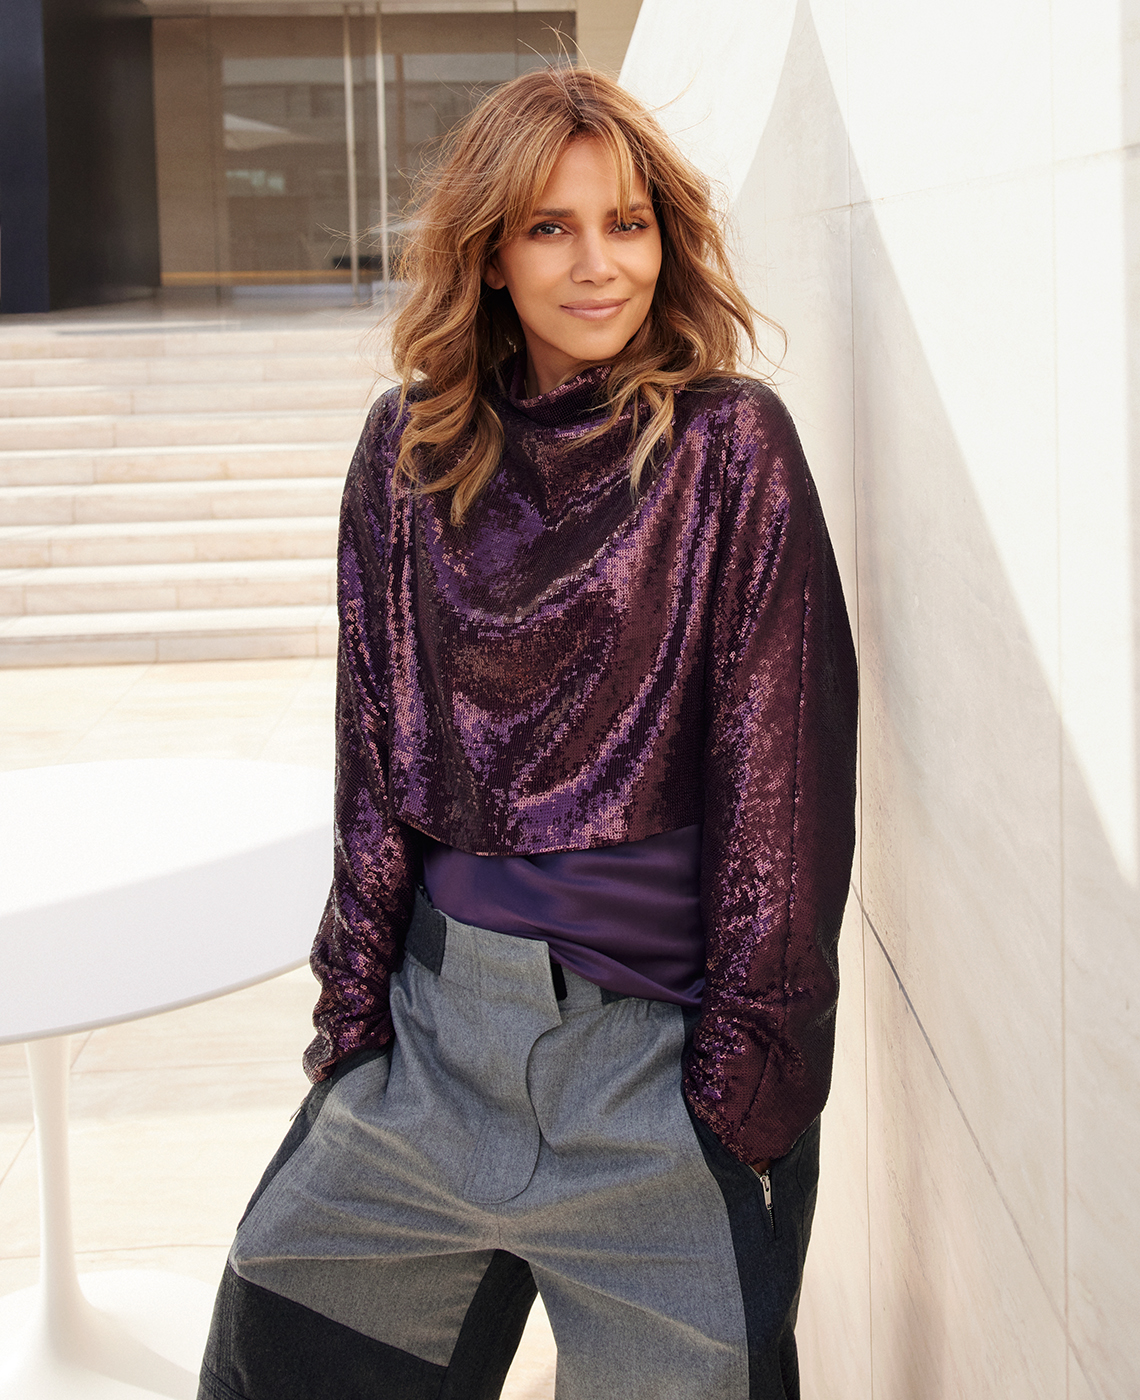 halle berry as photographed in twenty twenty two wearing a sequined top and funky gray and black wide leg pants